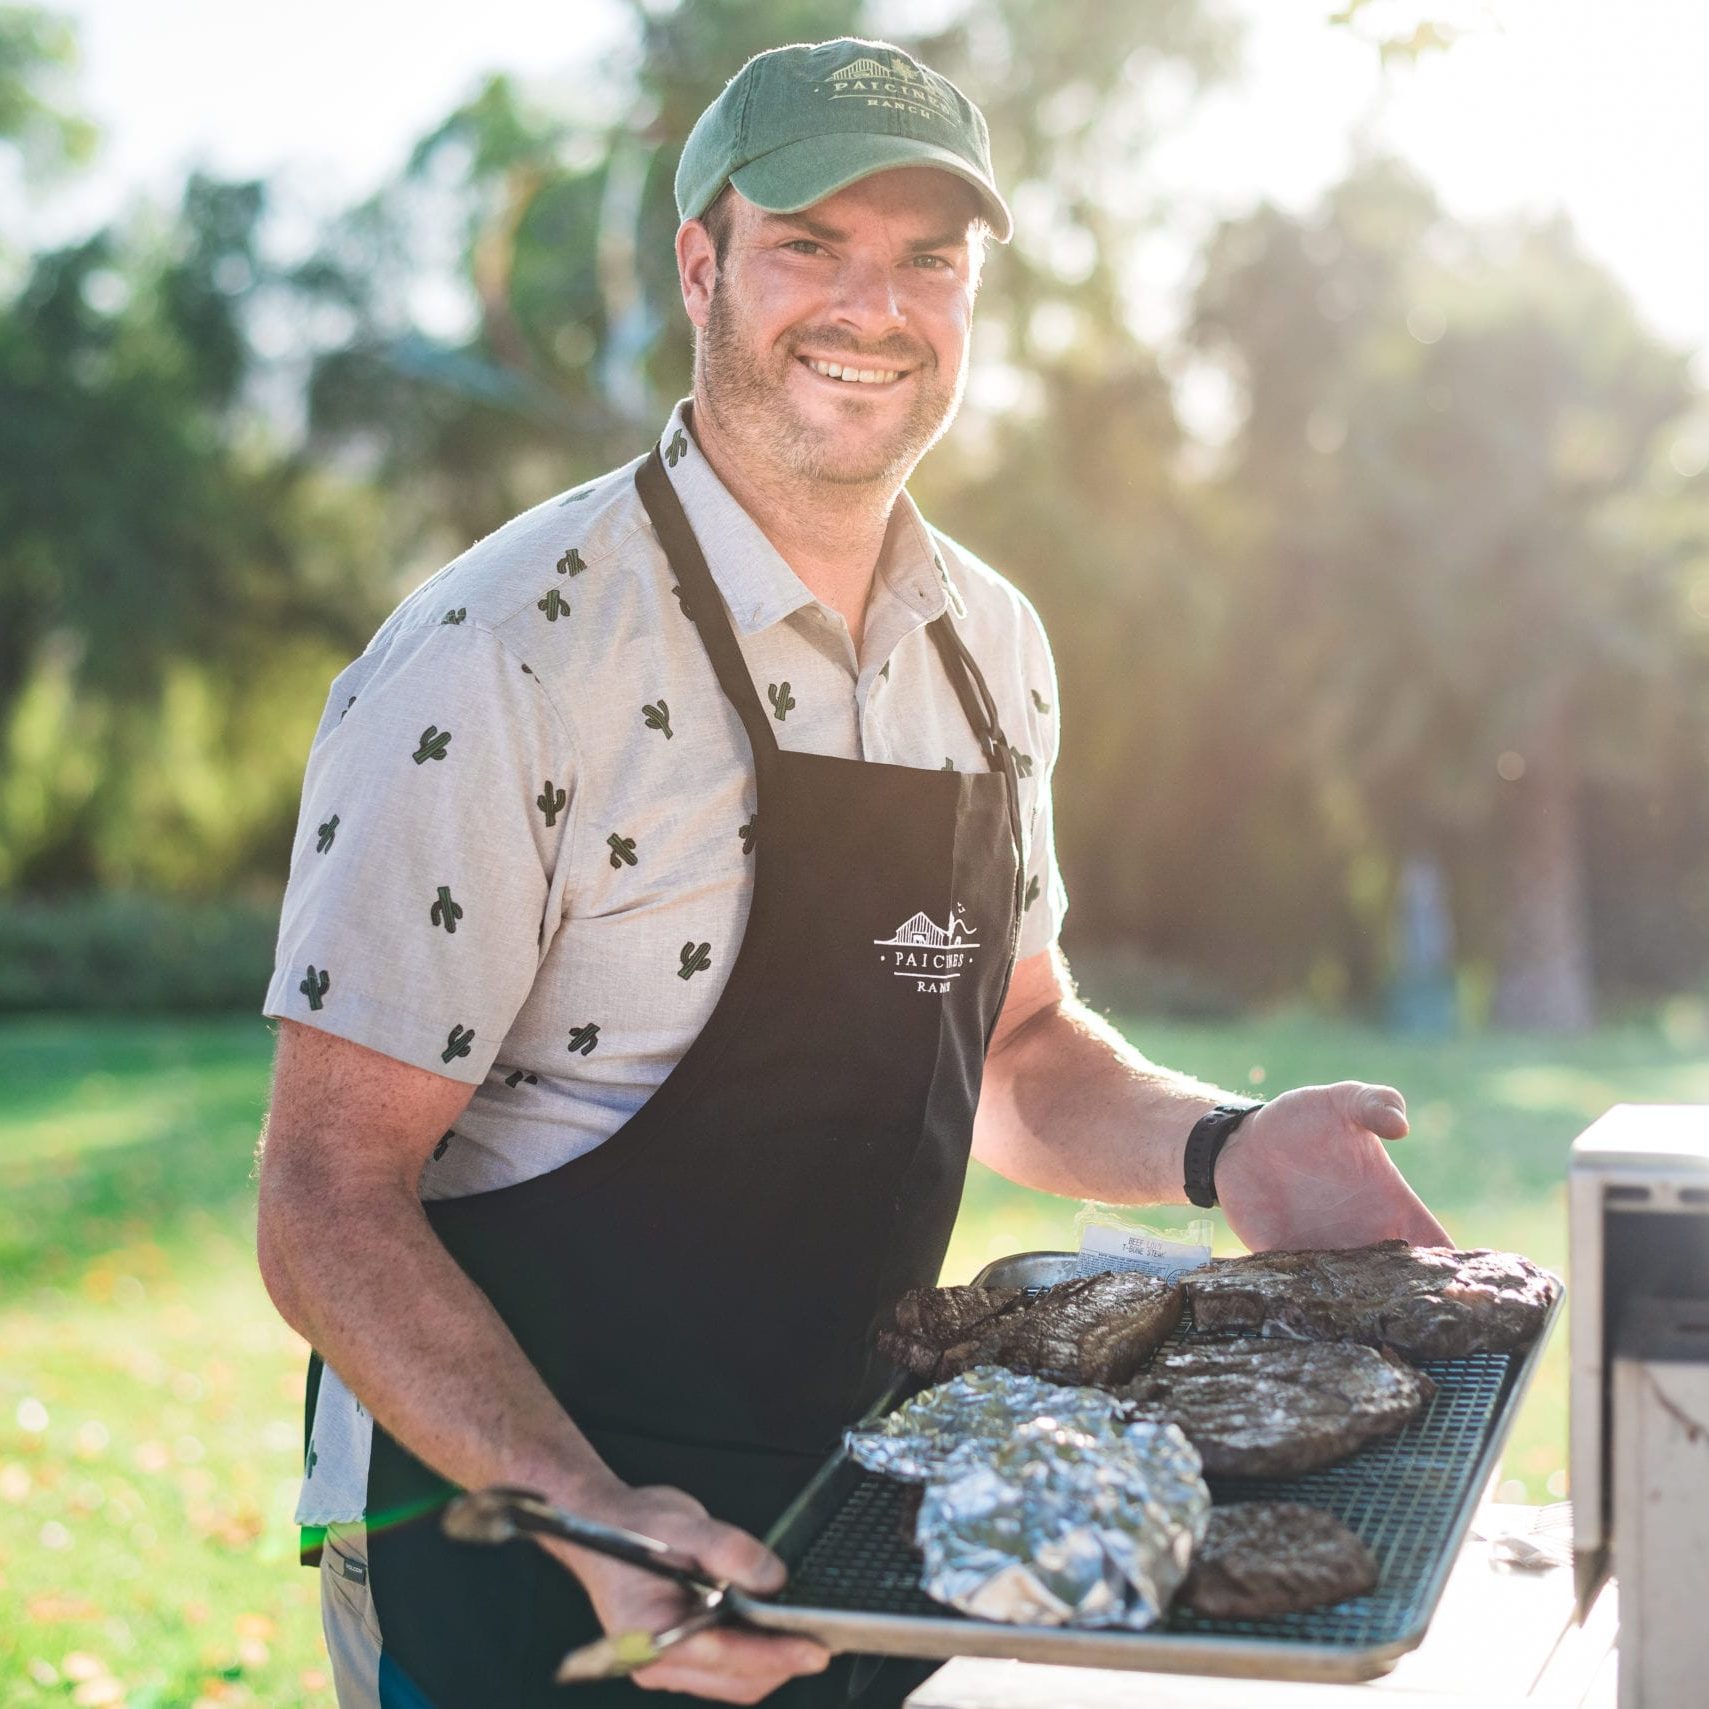 Keith Brennan grilling Paicines meat by Alicia Arcidiacono